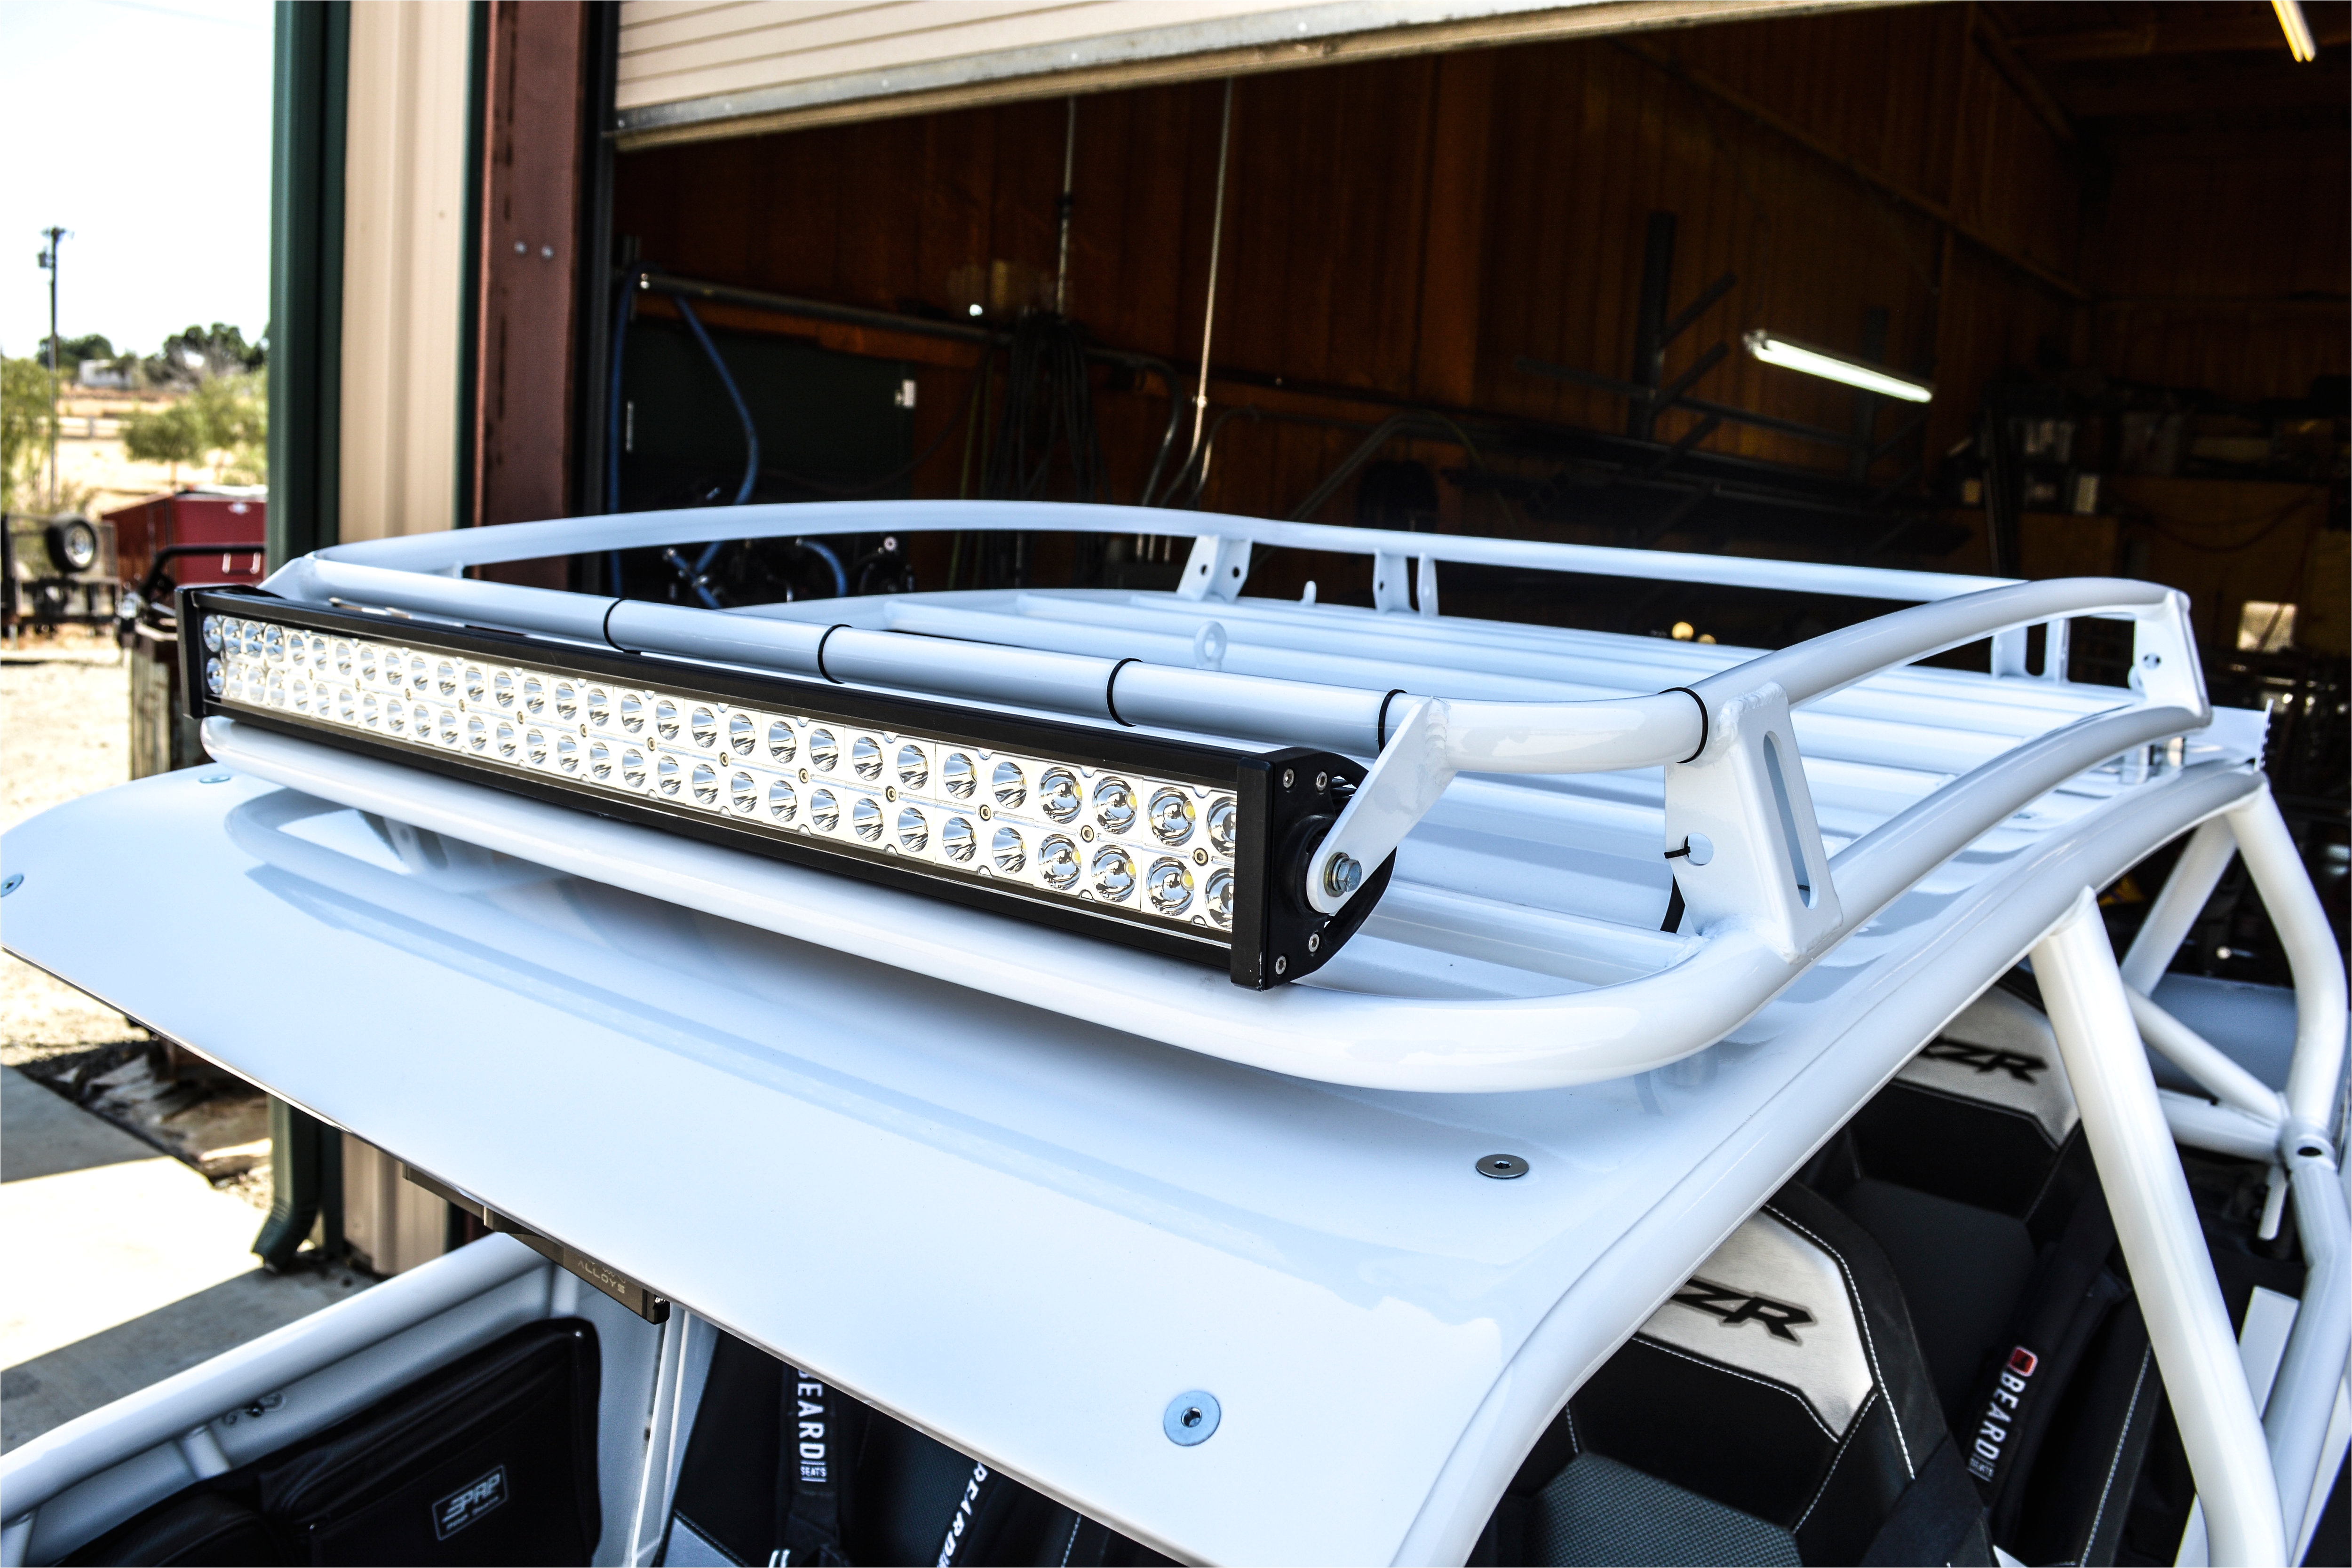 madigan motorsports roof rack for the polaris rzr xp 1000 4 seater fits 2014 up our roof rack features 1 25 and 1 seam welded tubing